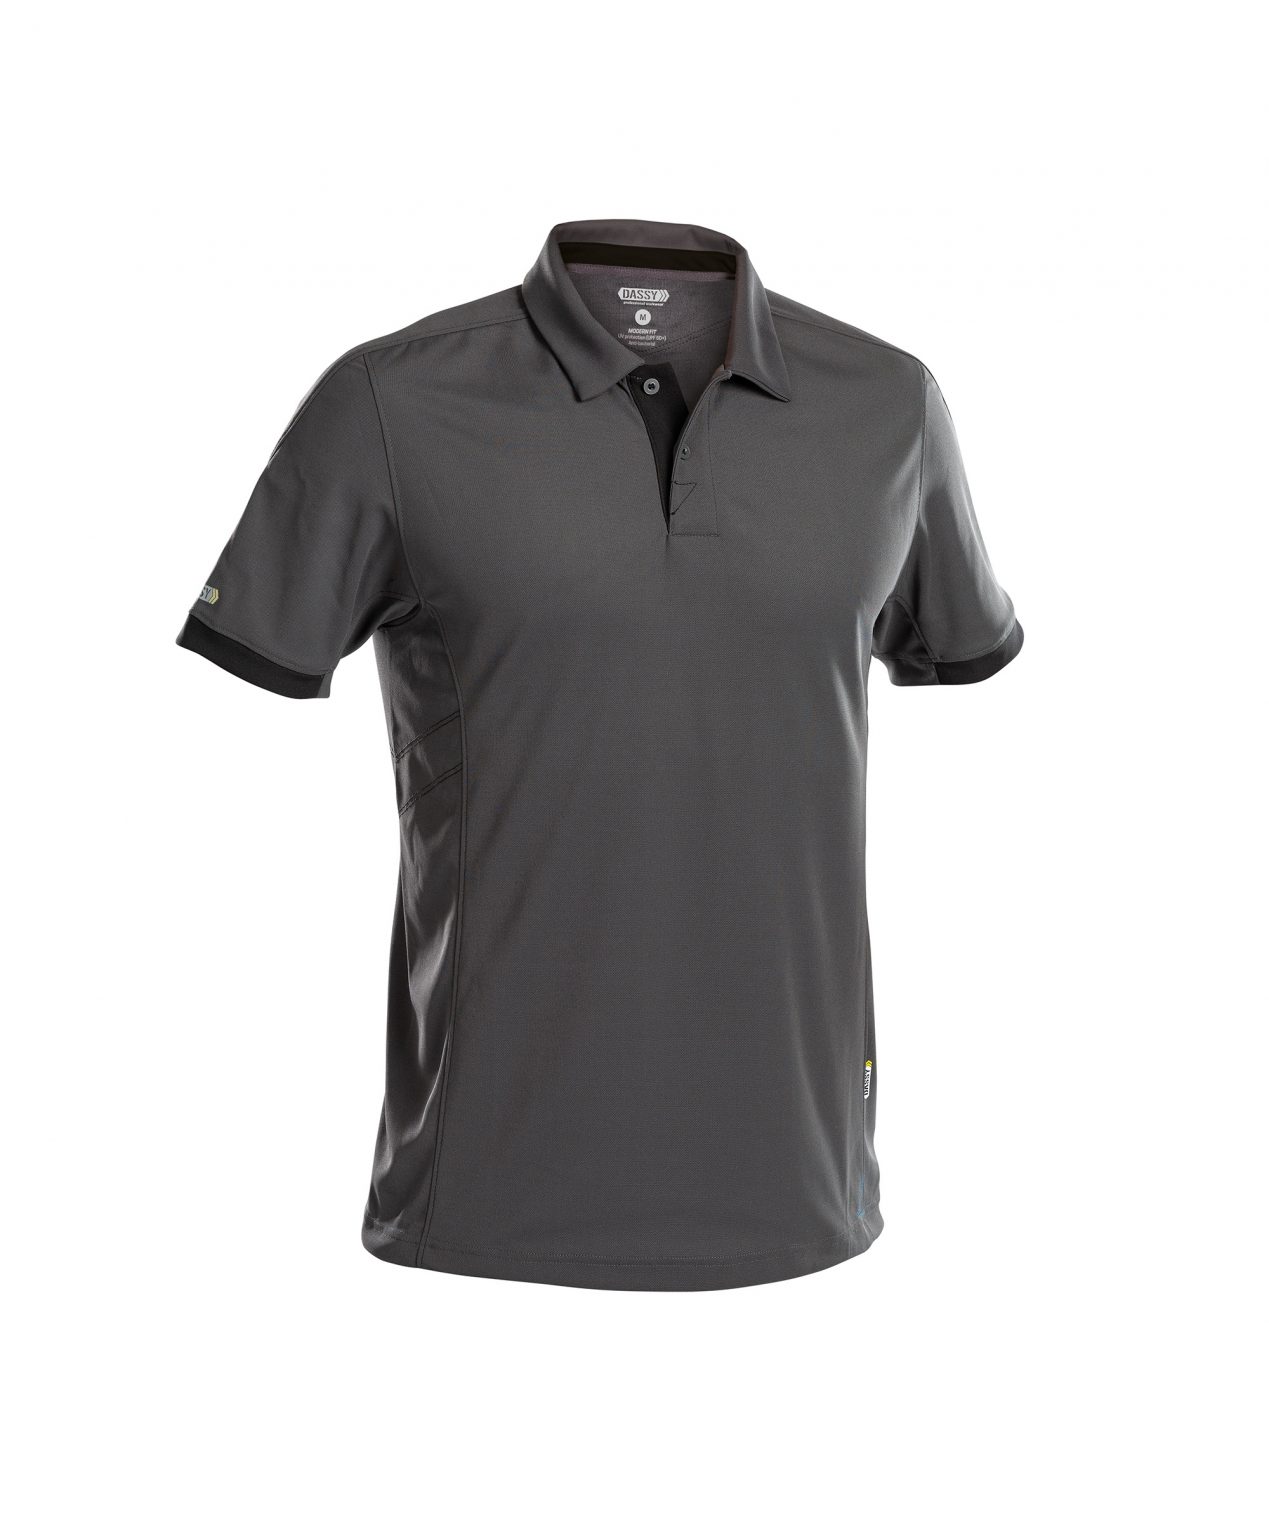 traxion polo shirt anthracite grey black front